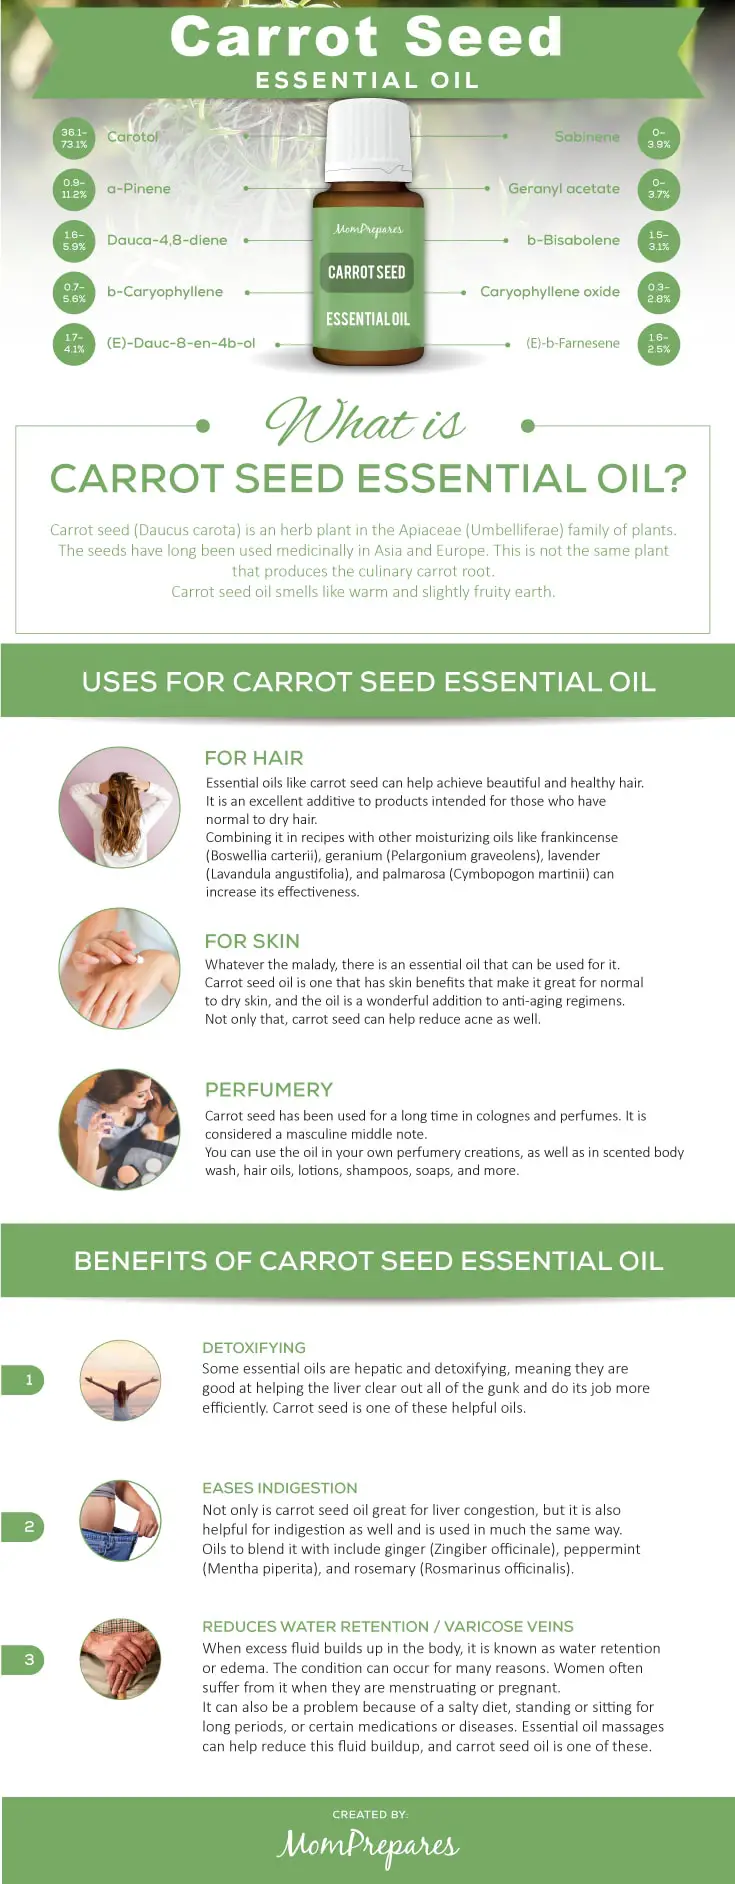 Carrot Seed infographic